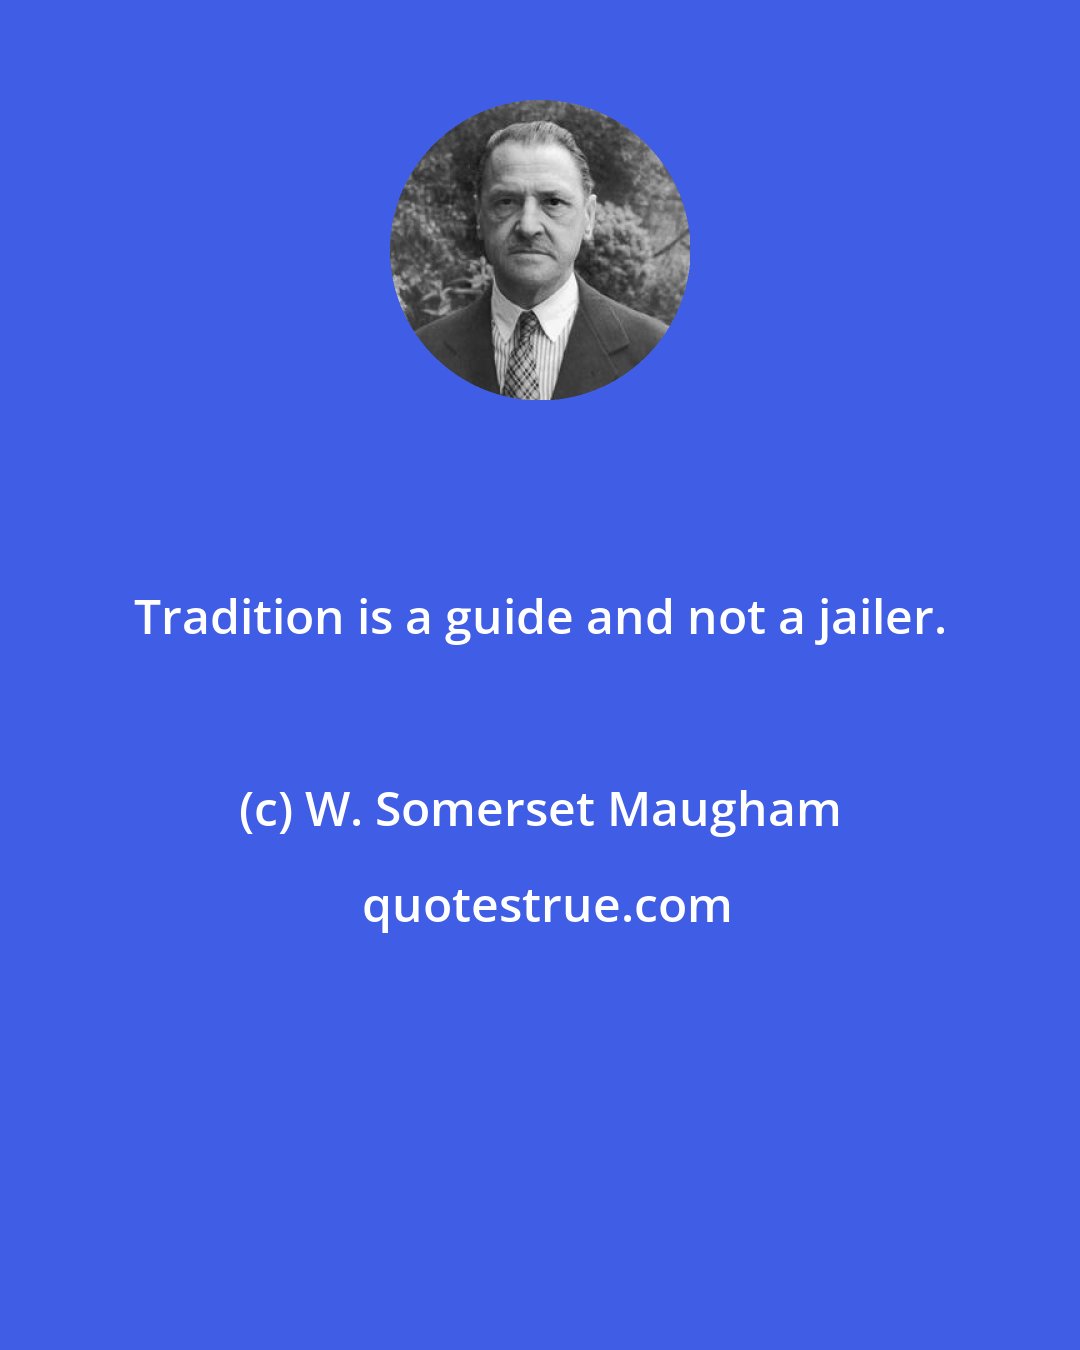 W. Somerset Maugham: Tradition is a guide and not a jailer.